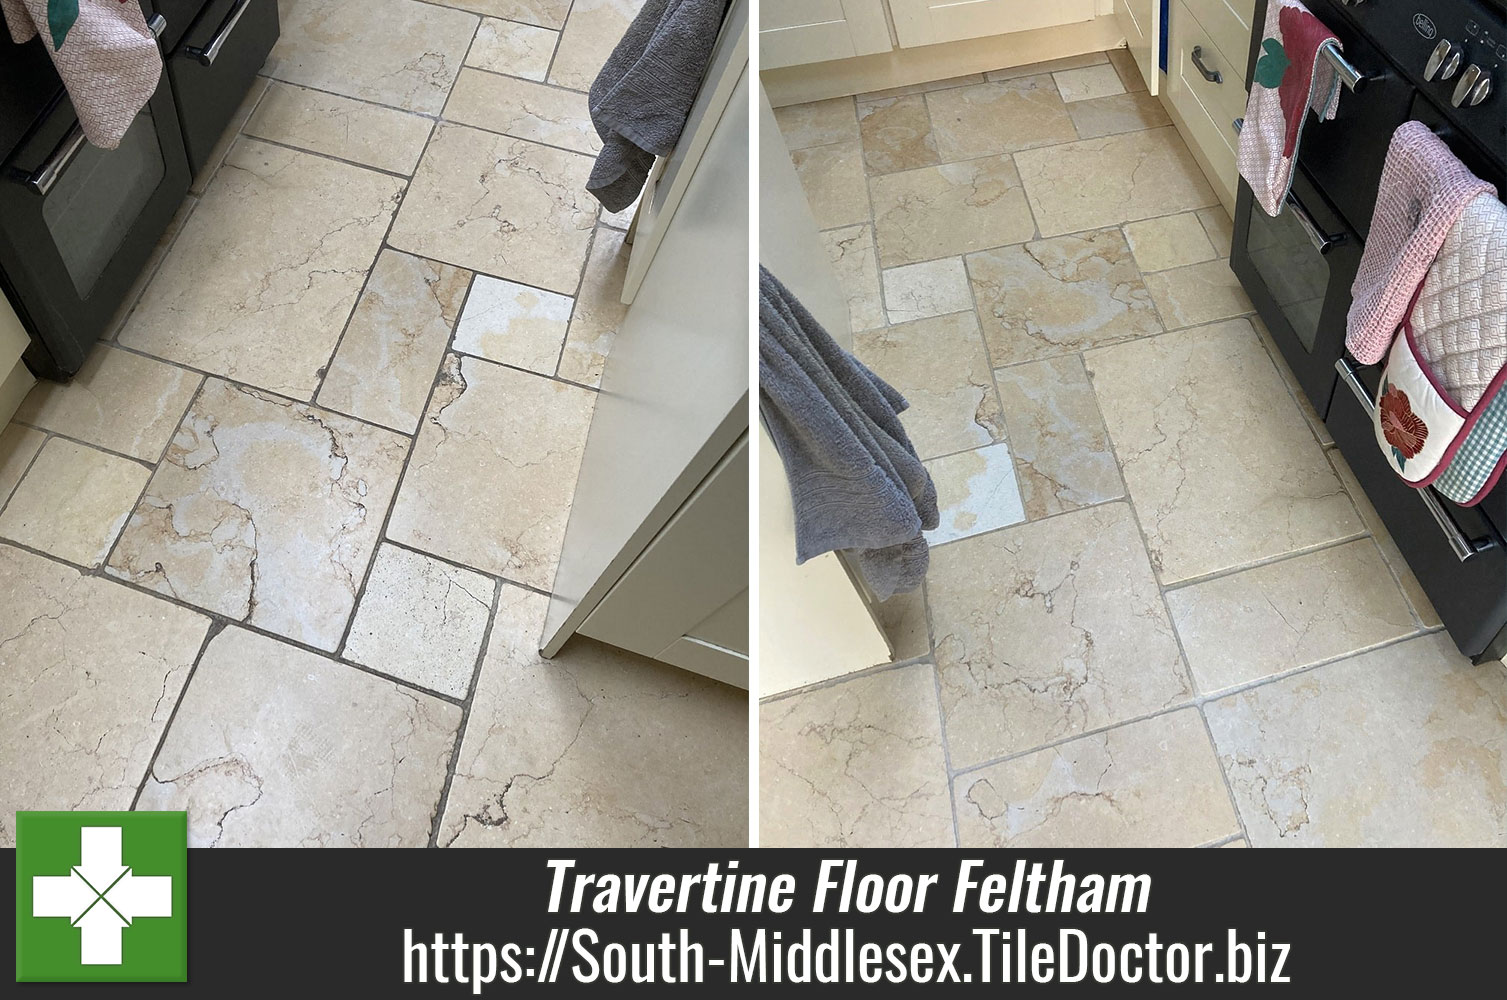 Deep Cleaning Grout with Pro-Clean combined with Remove and Go in Feltham